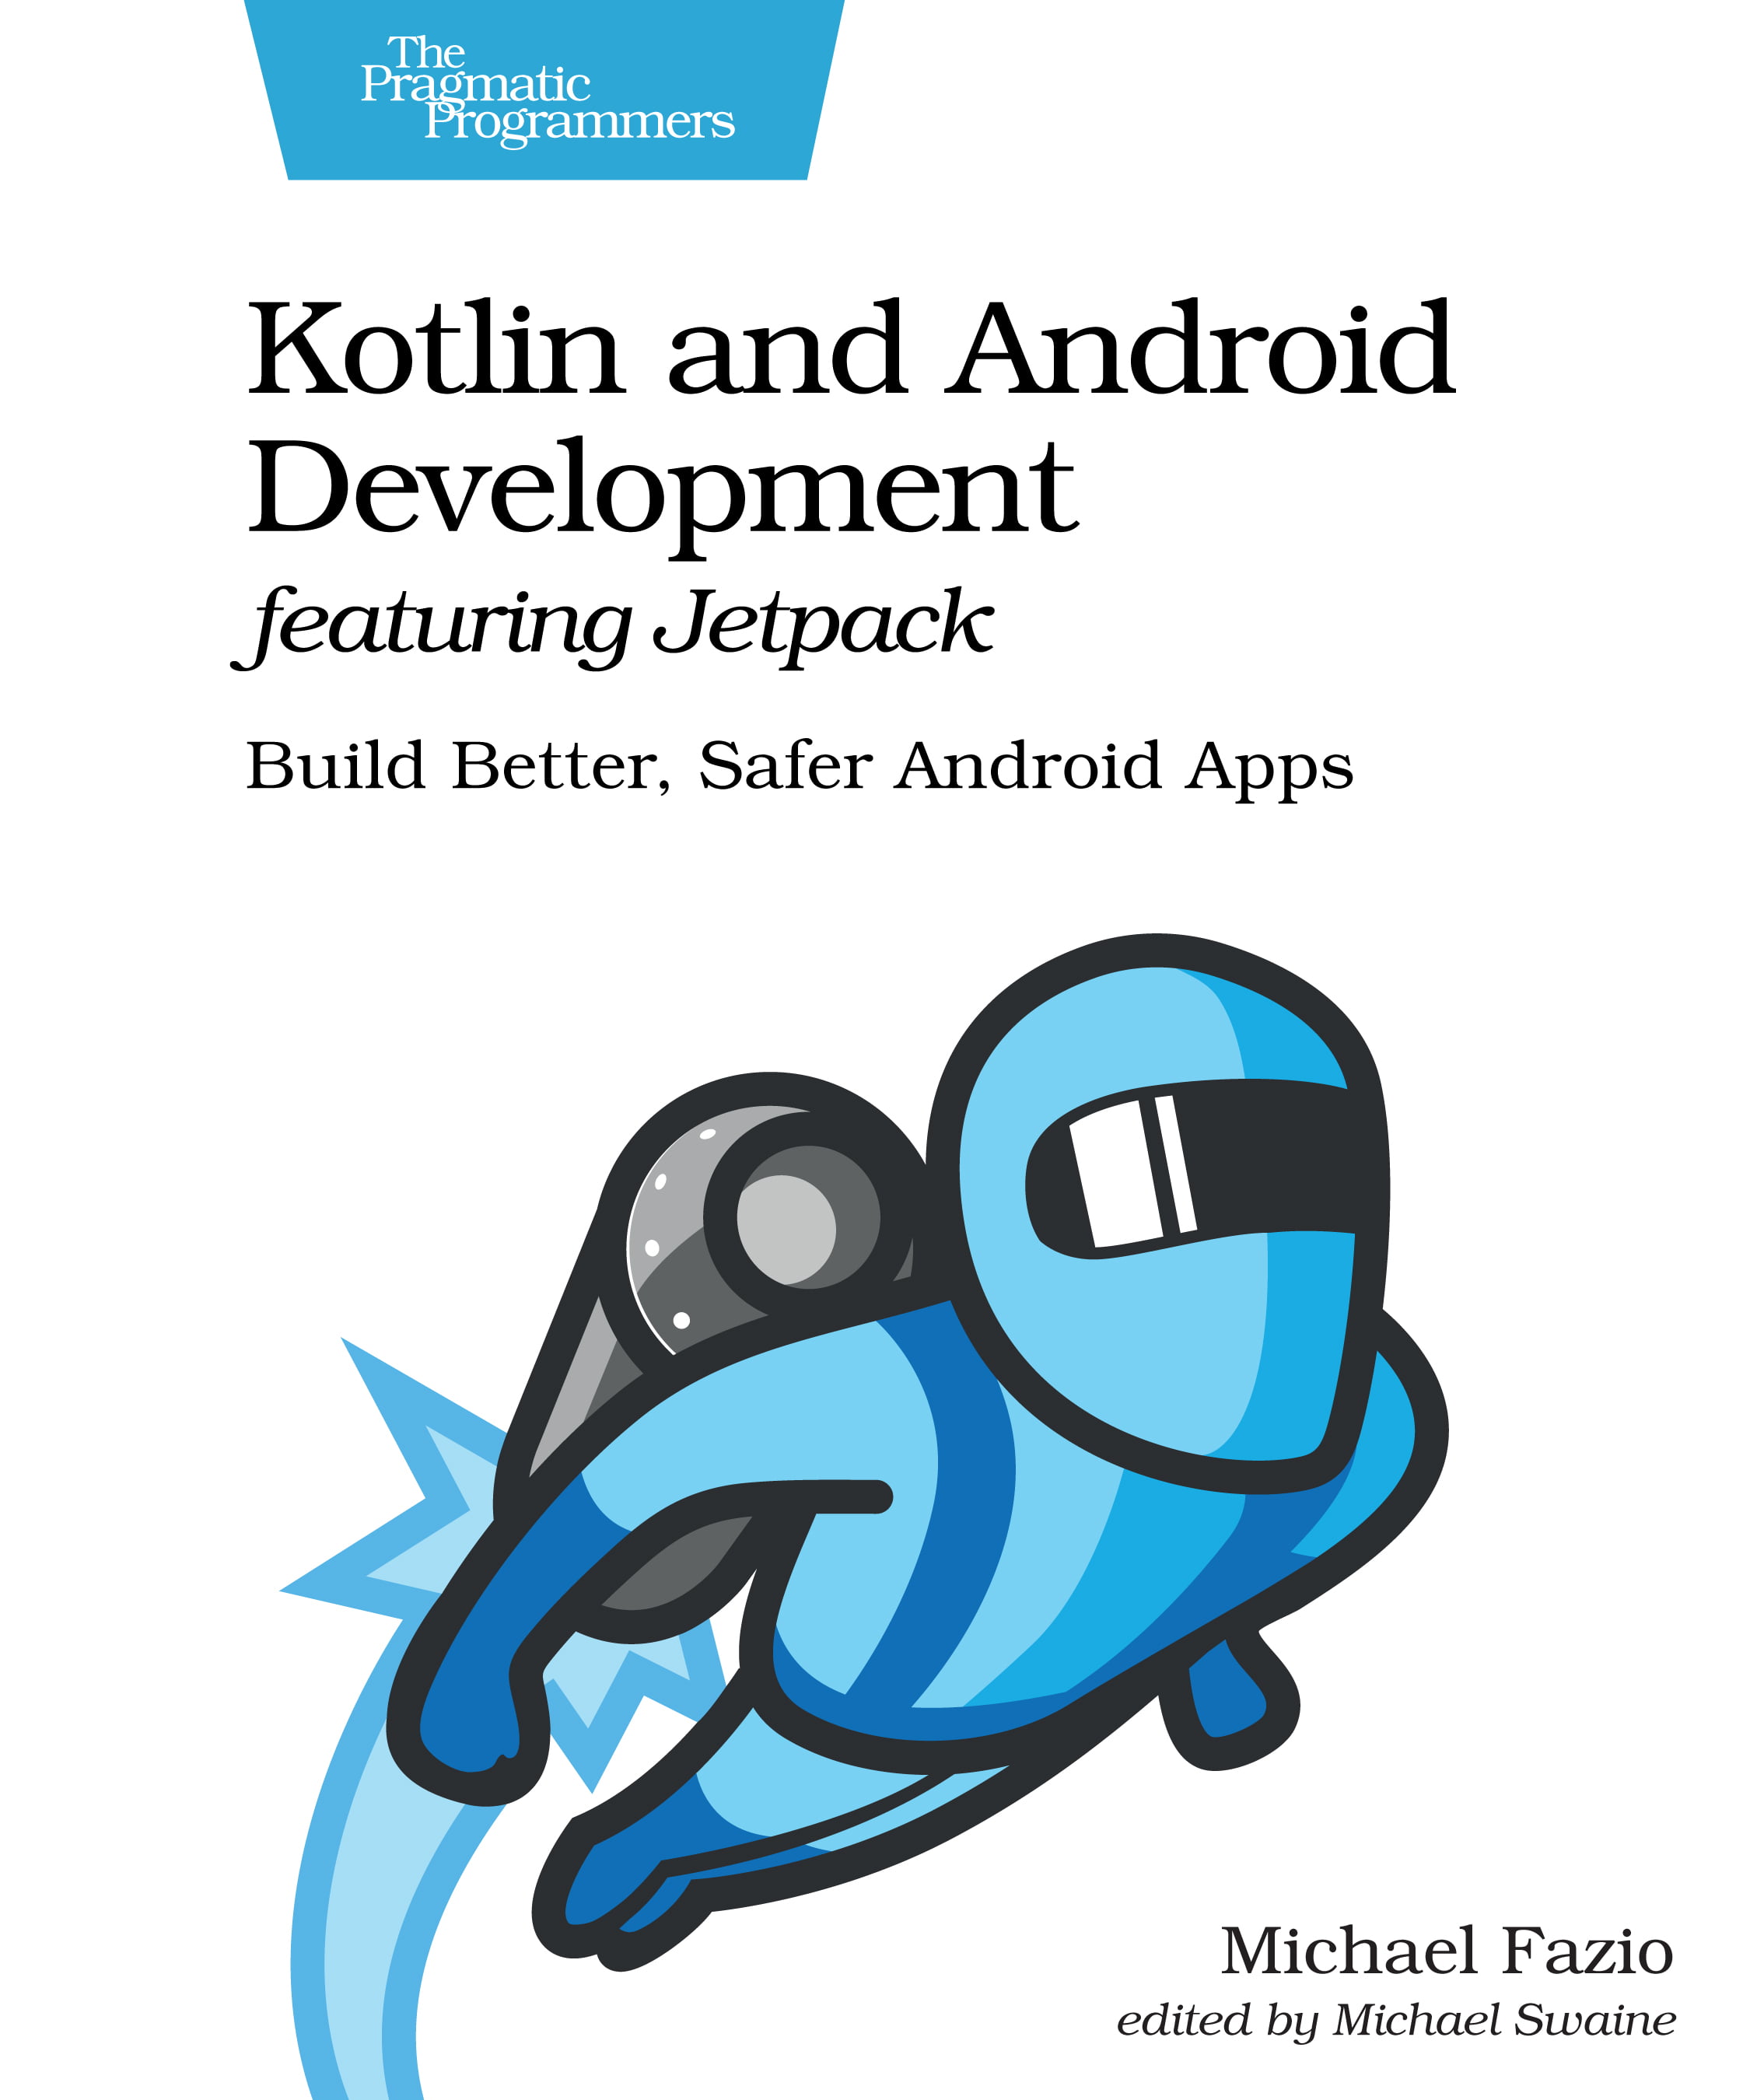 Kotlin and Android Development featuring Jetpack. Build Better, Safer Android Apps